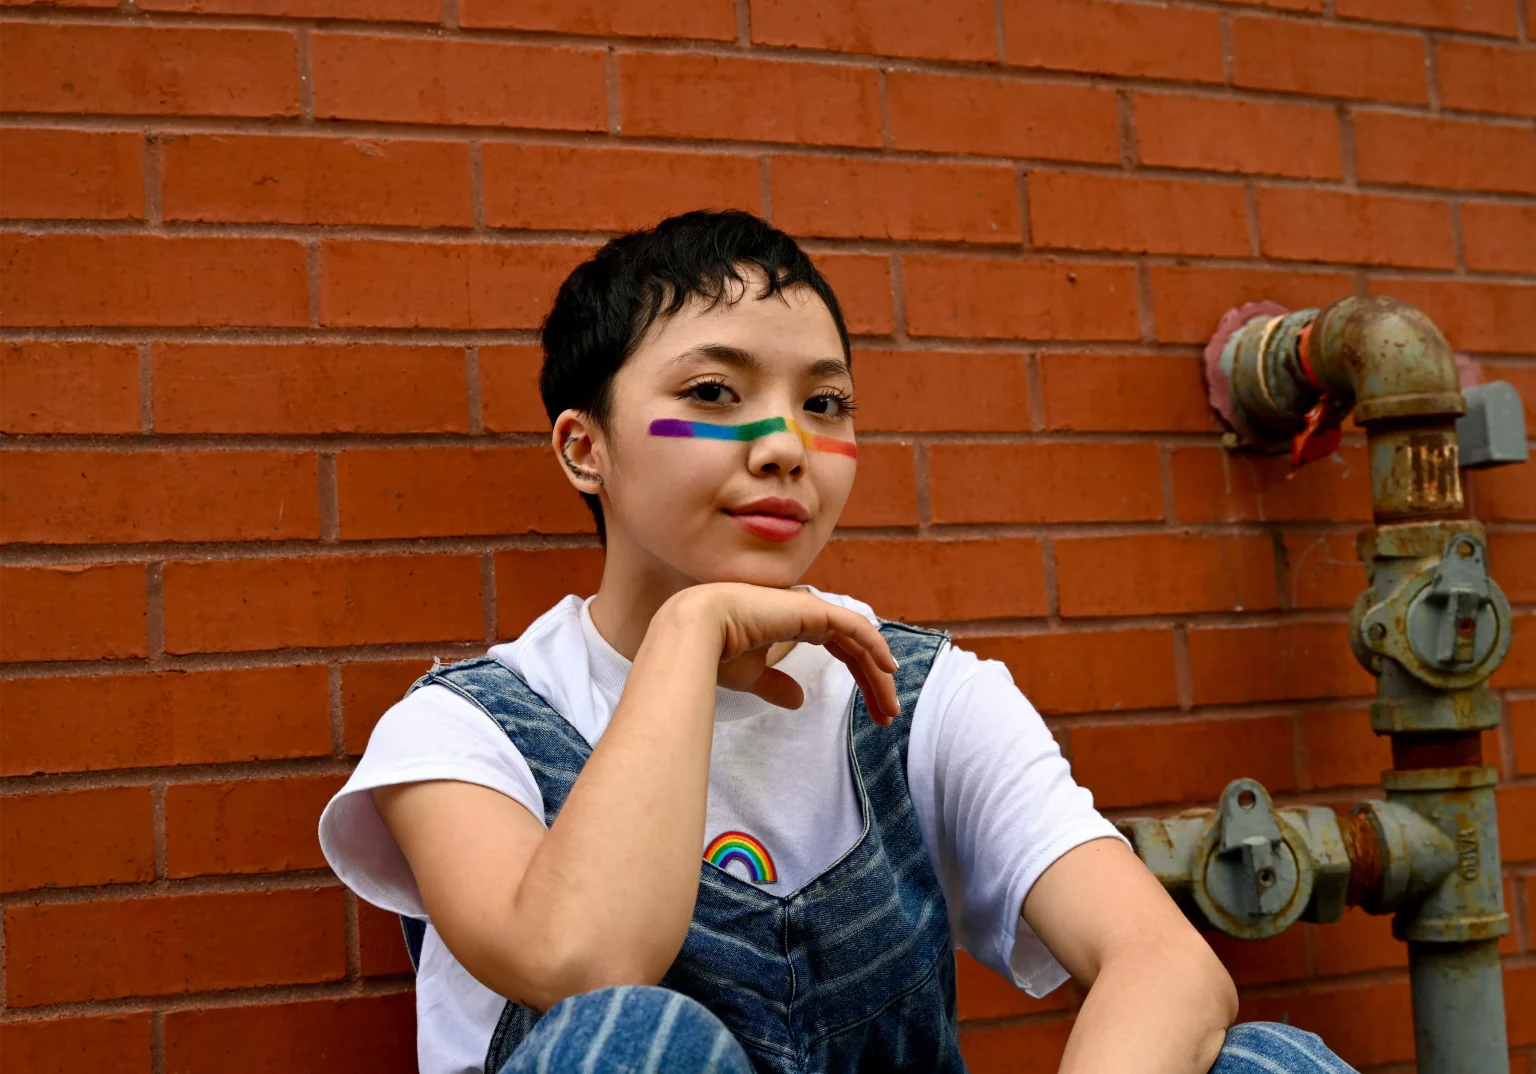 Facialteam Foundation page cover image showing a community activist with a pride flag in her face